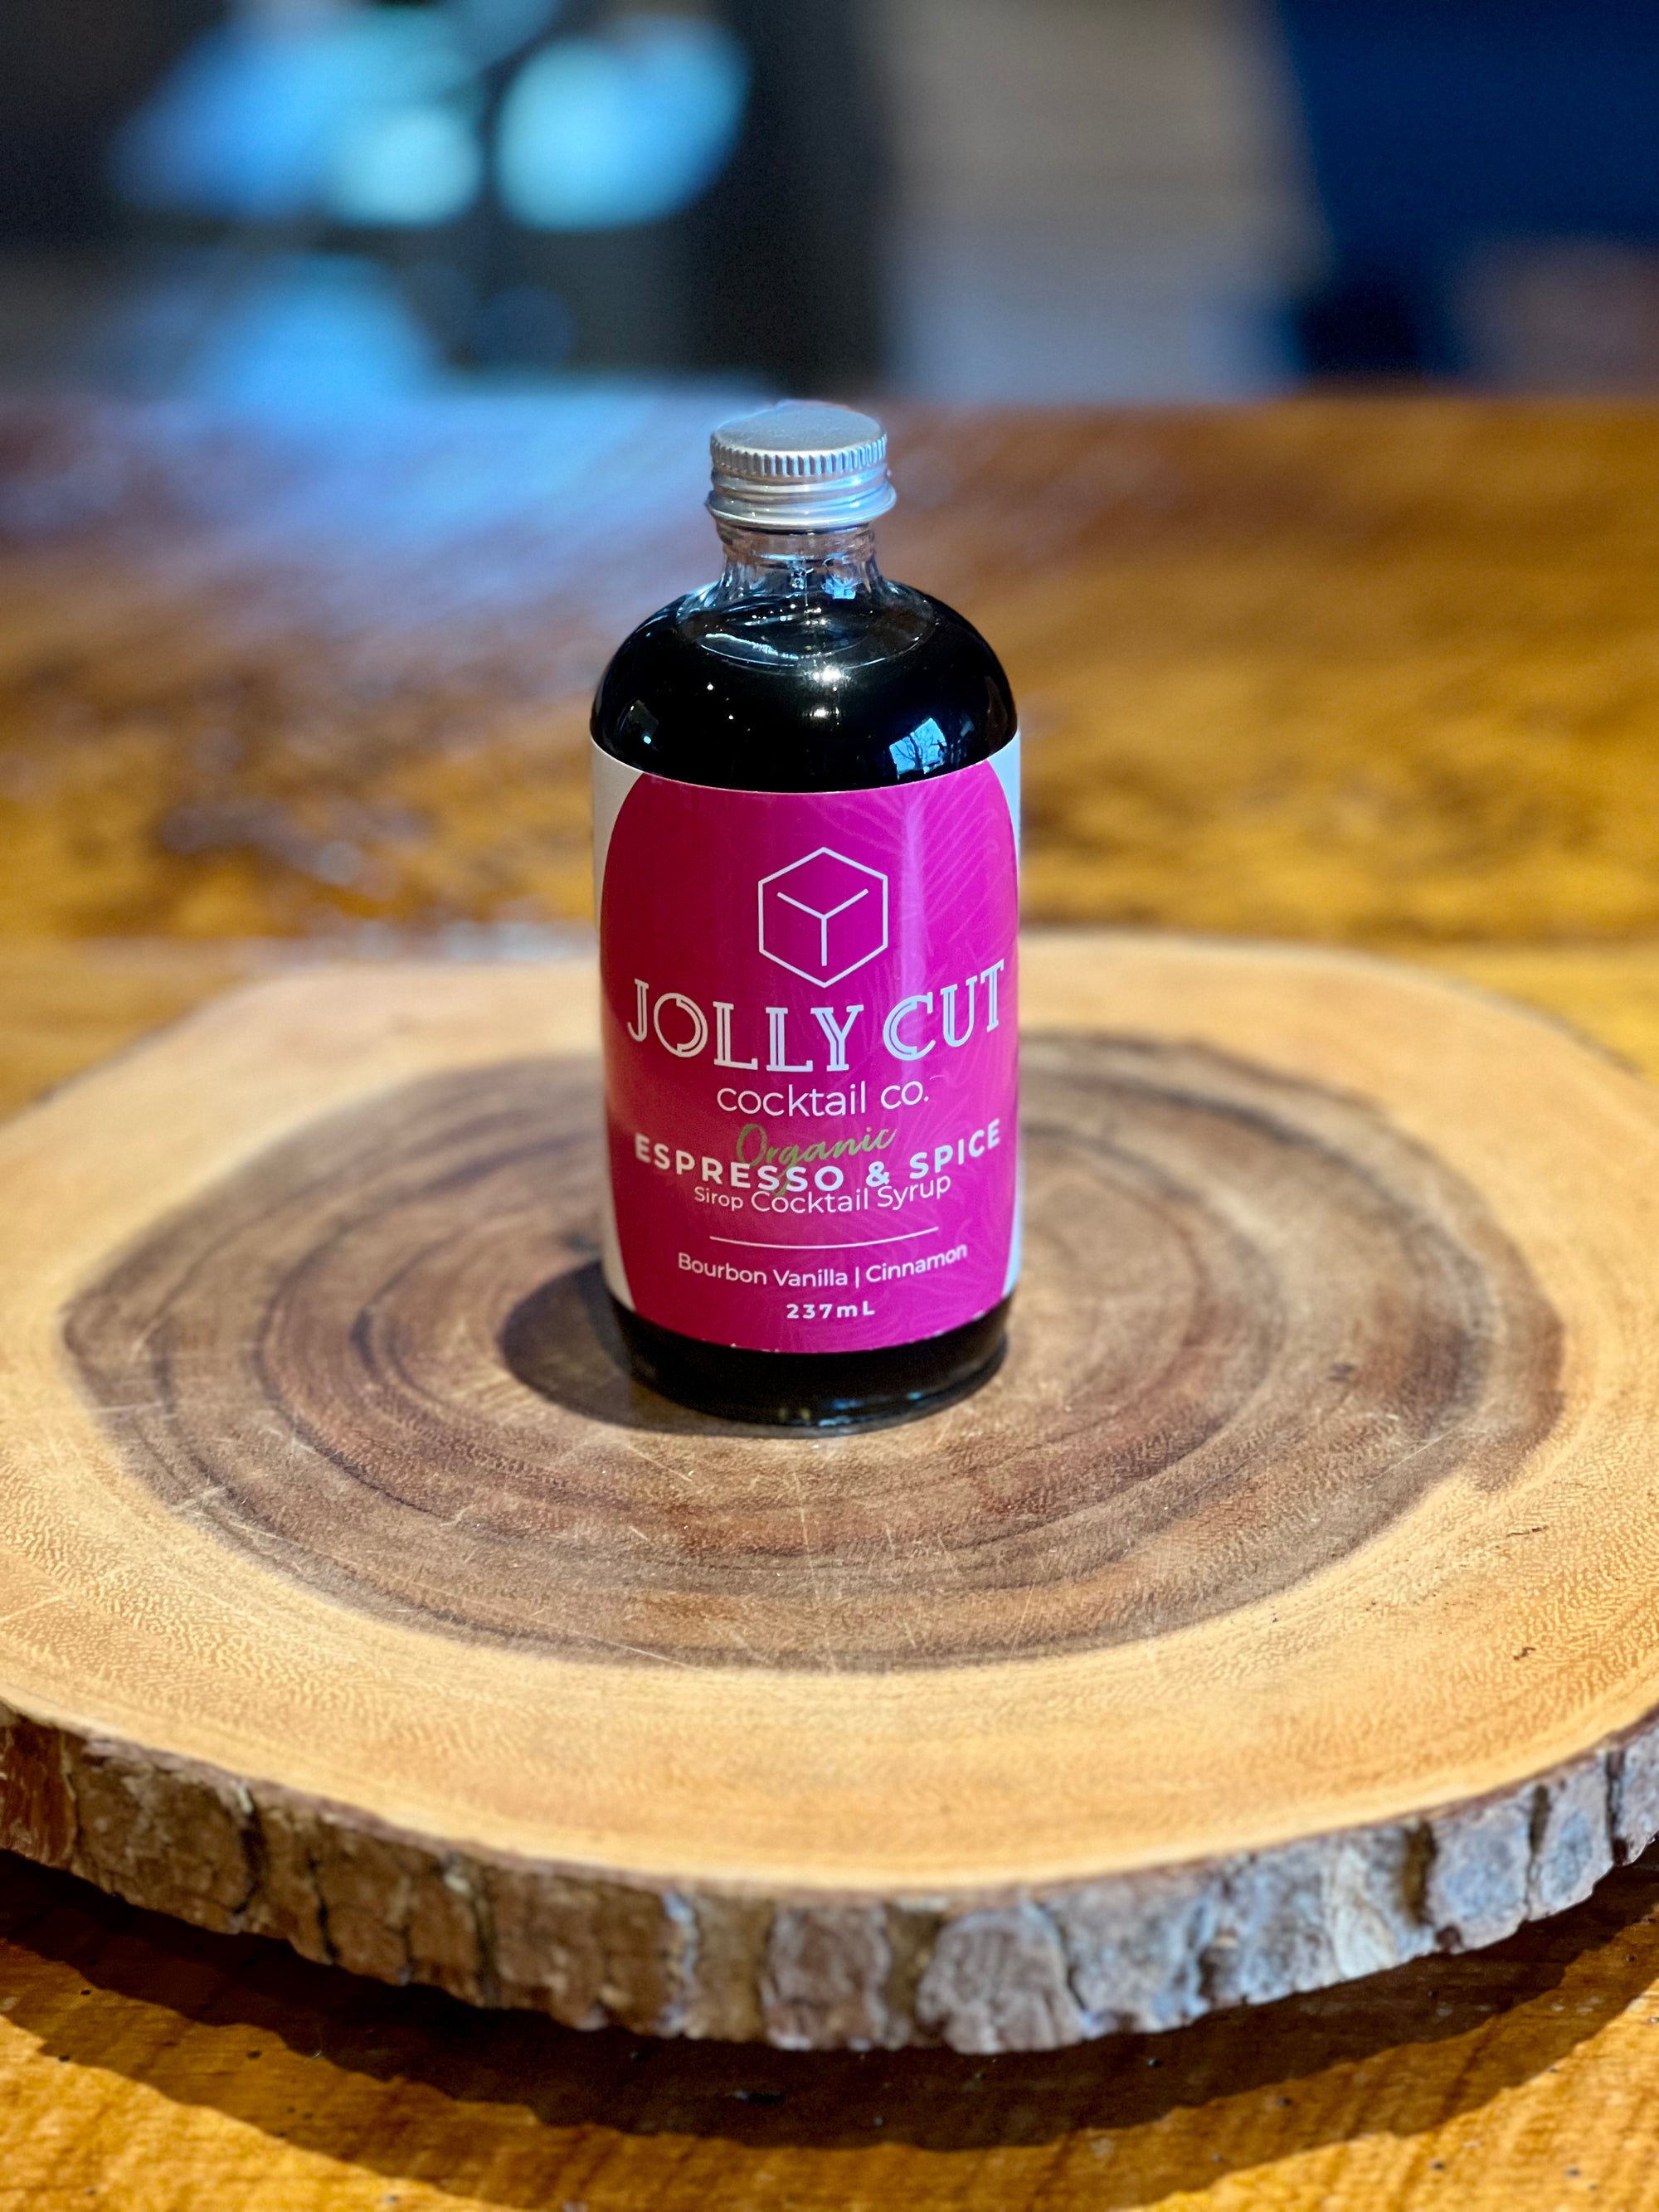 Jolly Cut Cocktail Co. Syrups